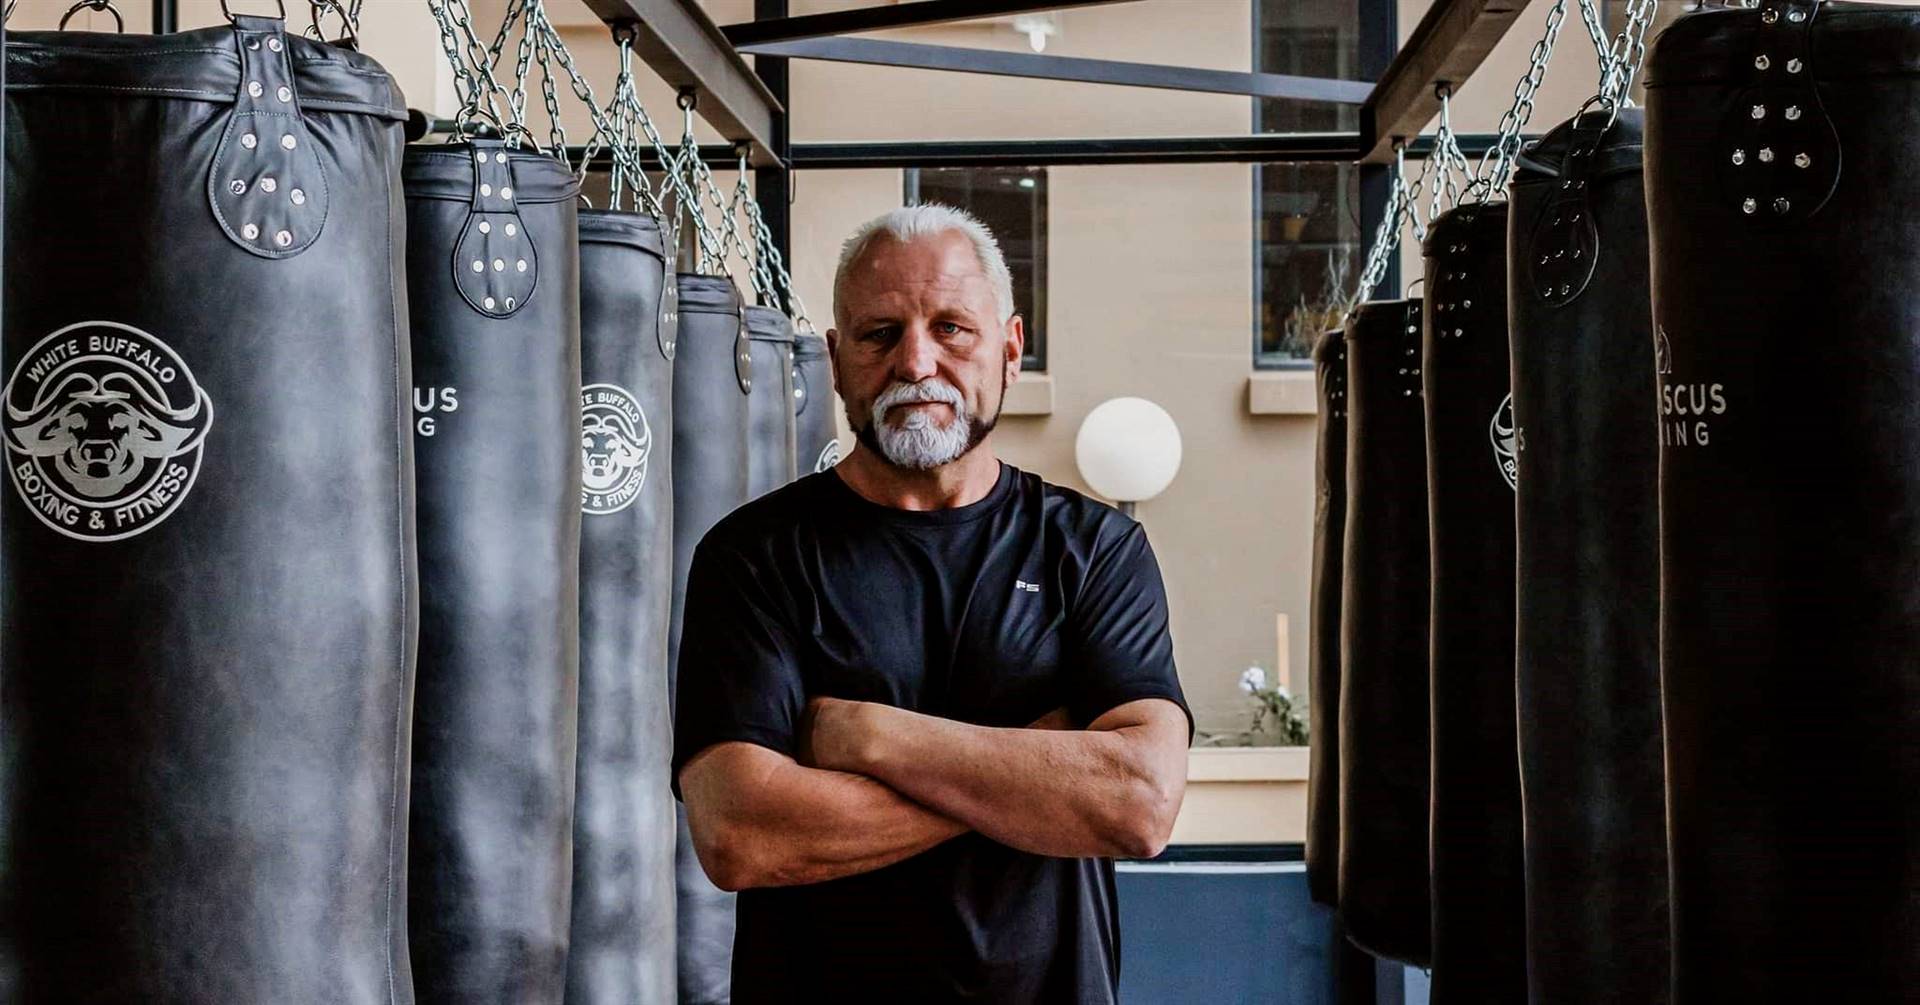 News24 | Former SA boxing champ almost dies after spider bite